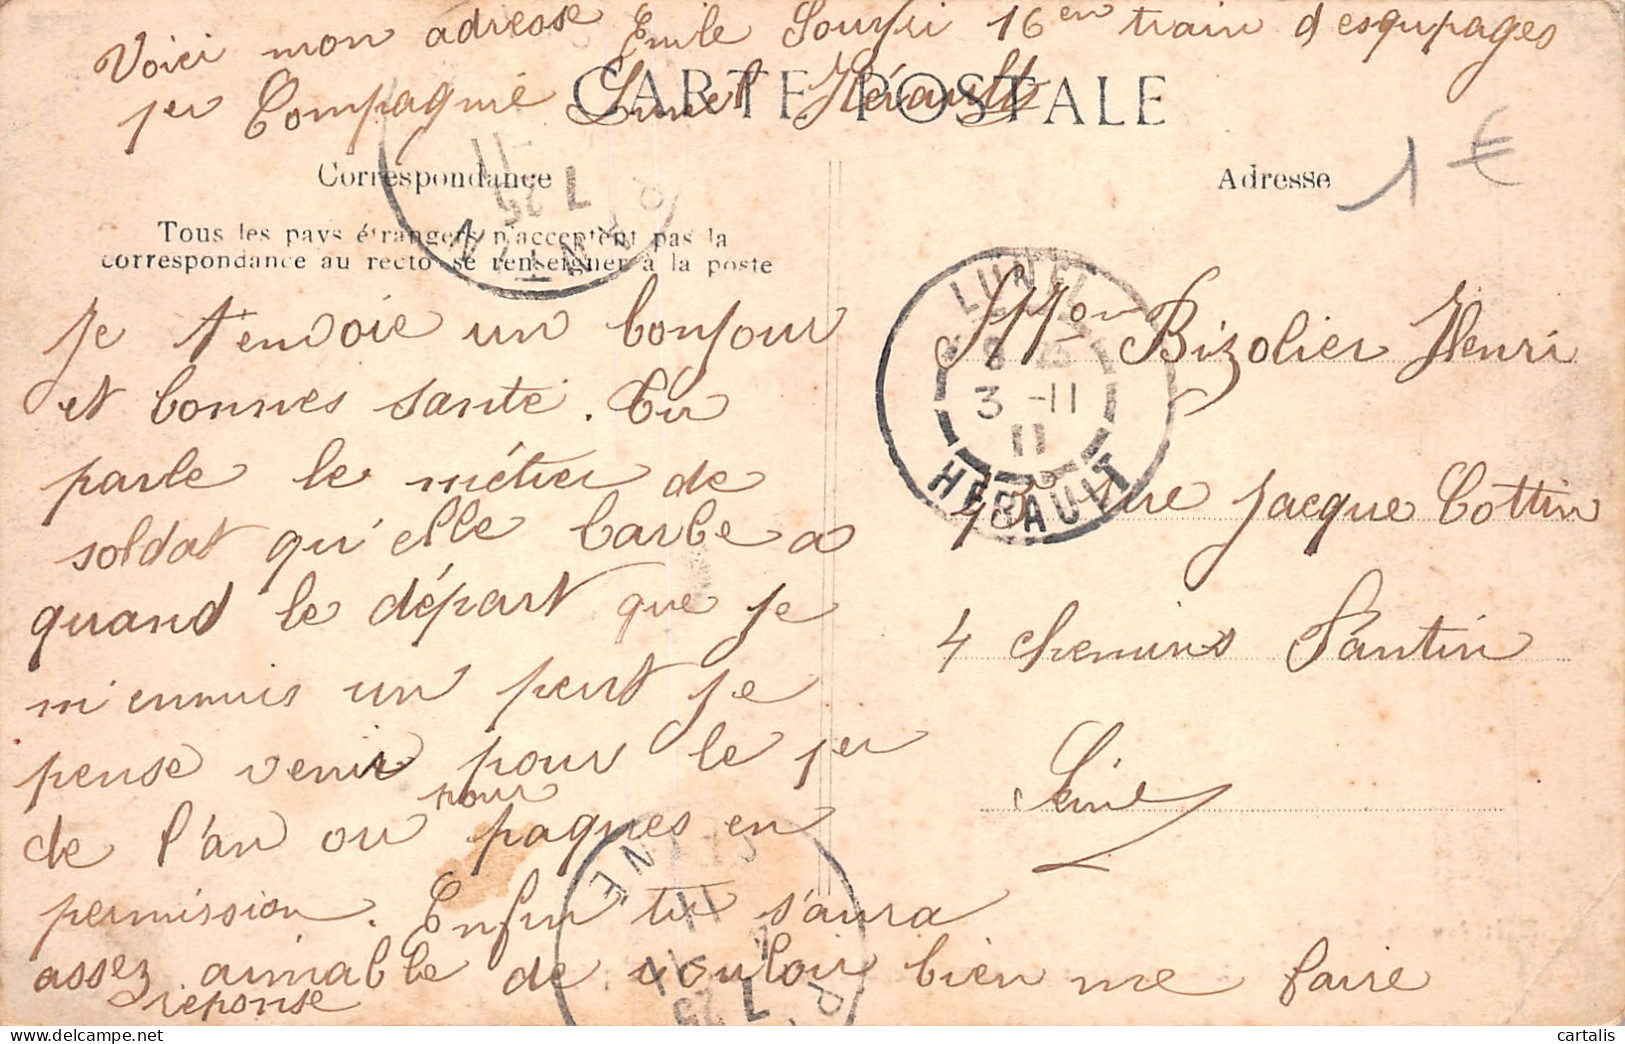 34-LUNEL-N°4227-A/0137 - Lunel